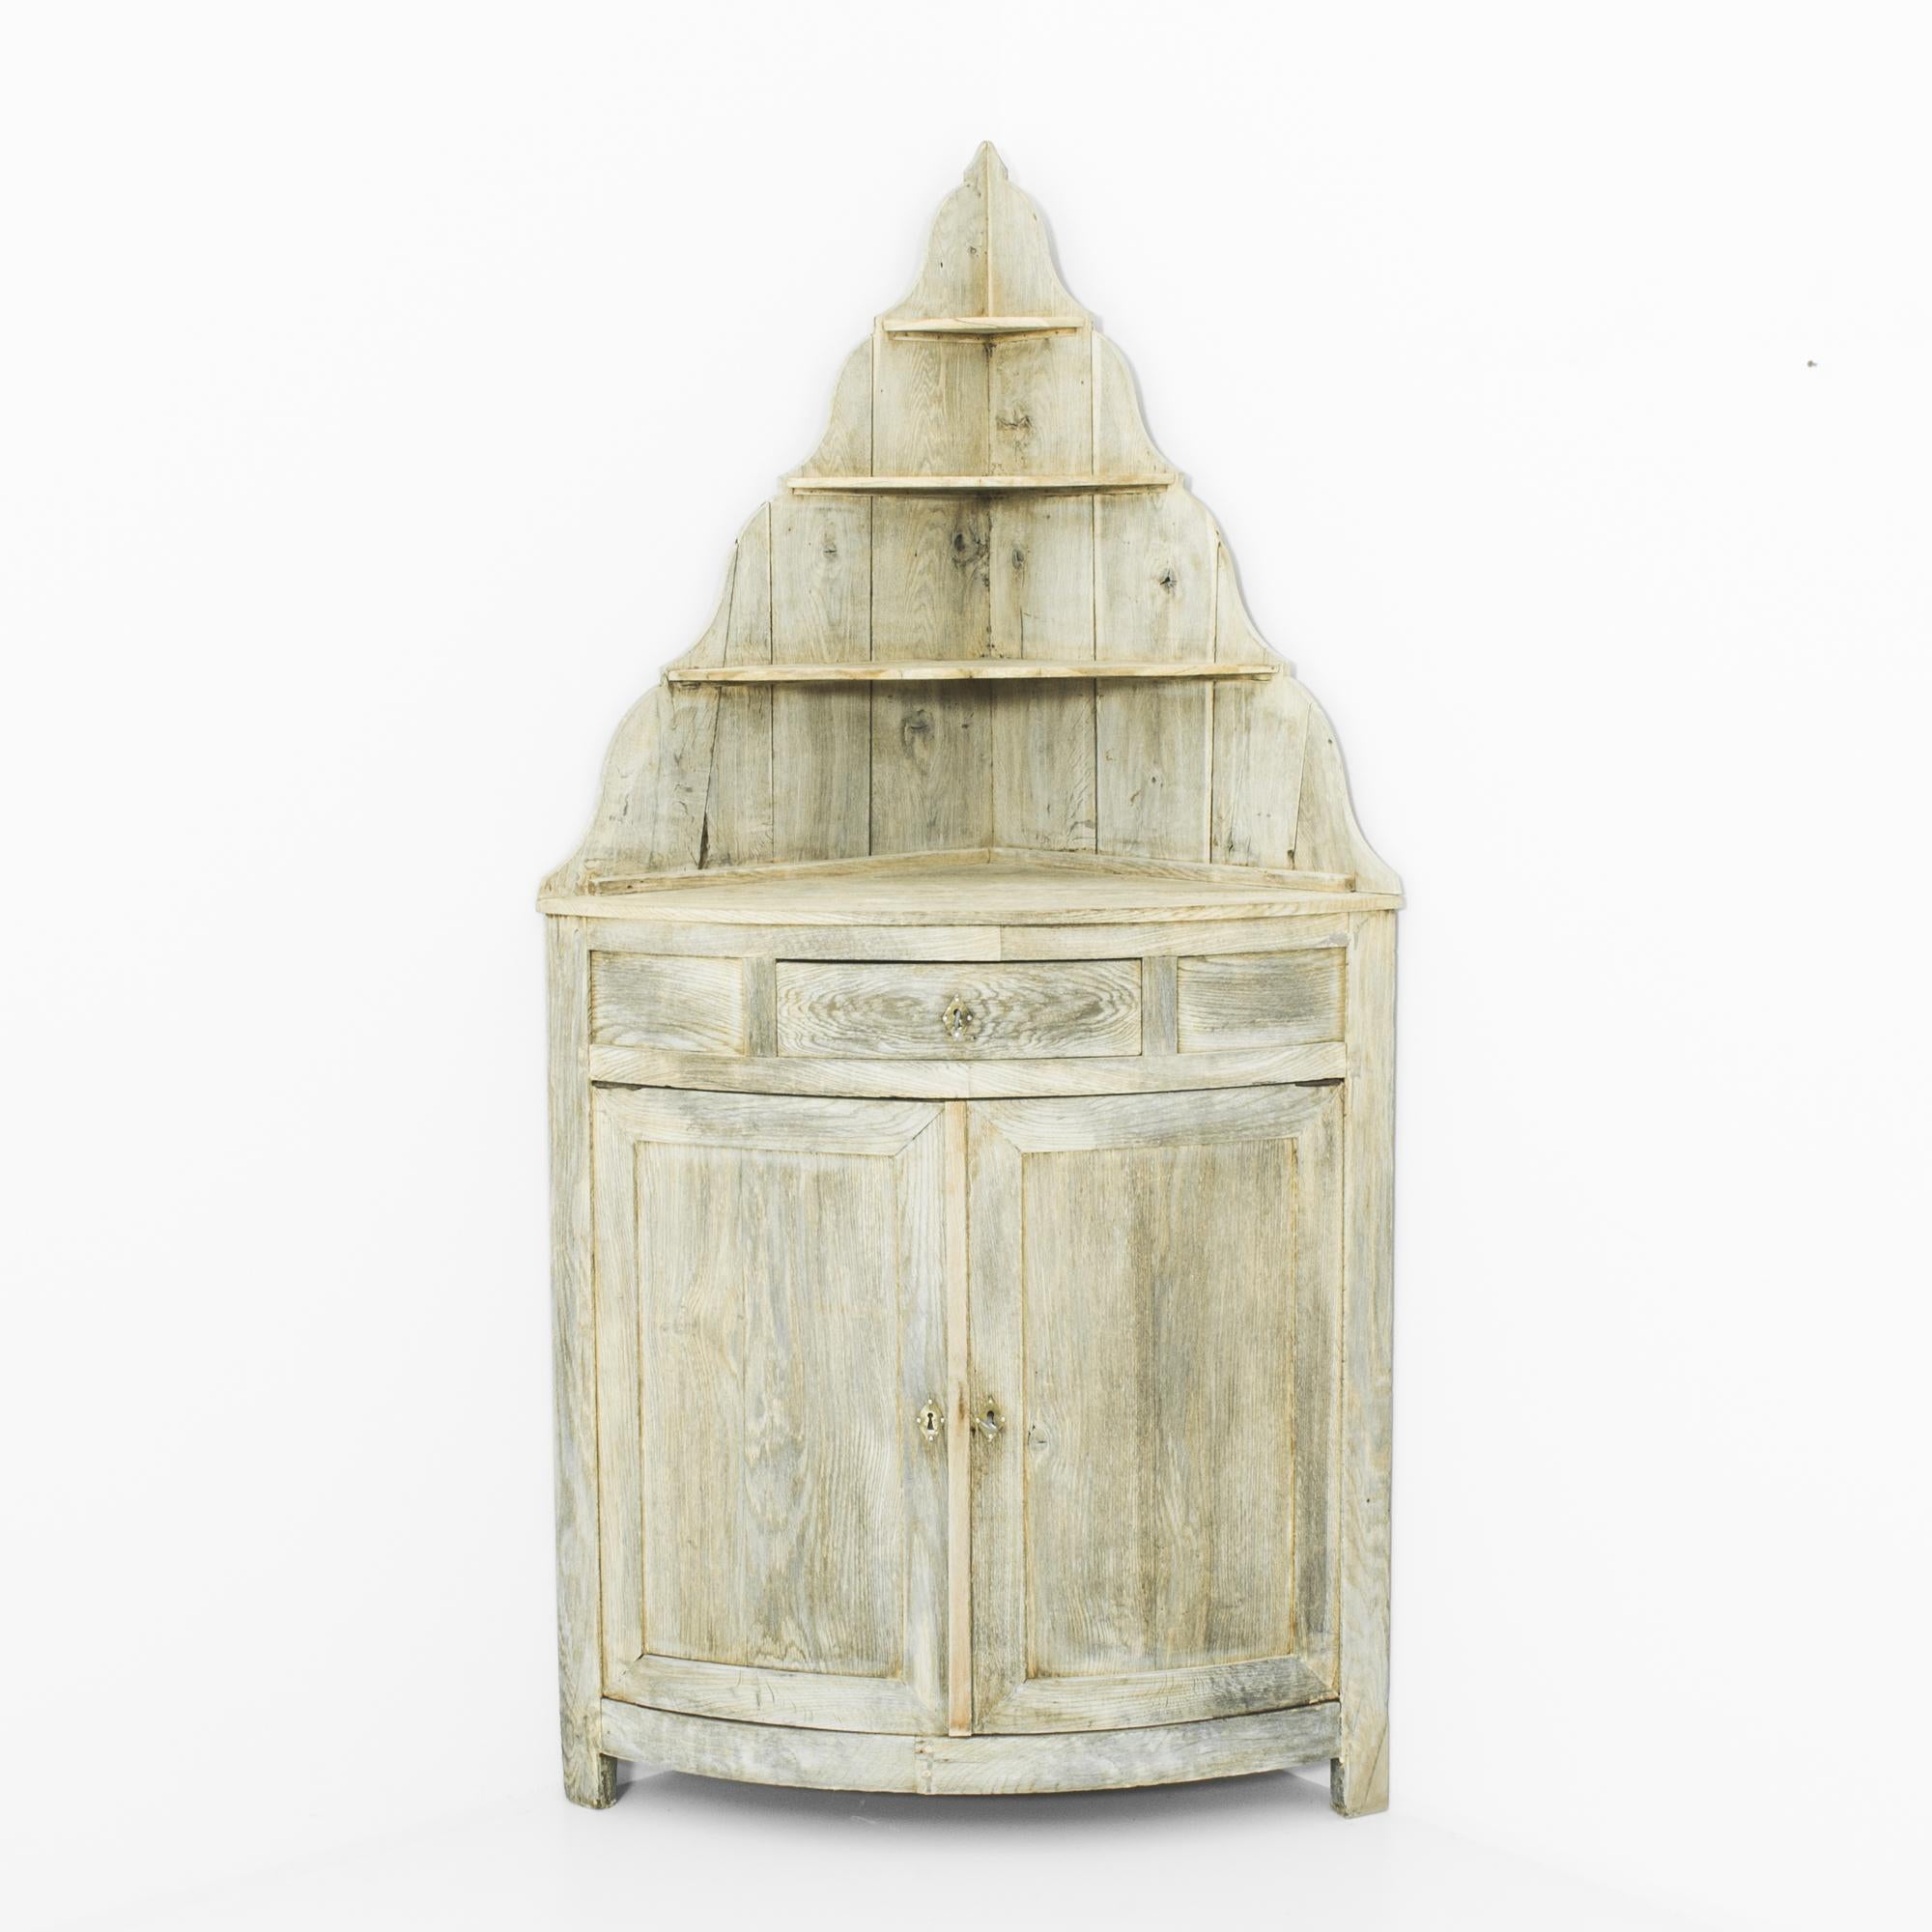 An oak corner cabinet from France, circa 1860. The unique silhouette creates a whimsical French Country aesthetic: the upper half ascends to a narrow point, like a turret or spire. The elegant contours of the upper shelves and the pale, alabaster